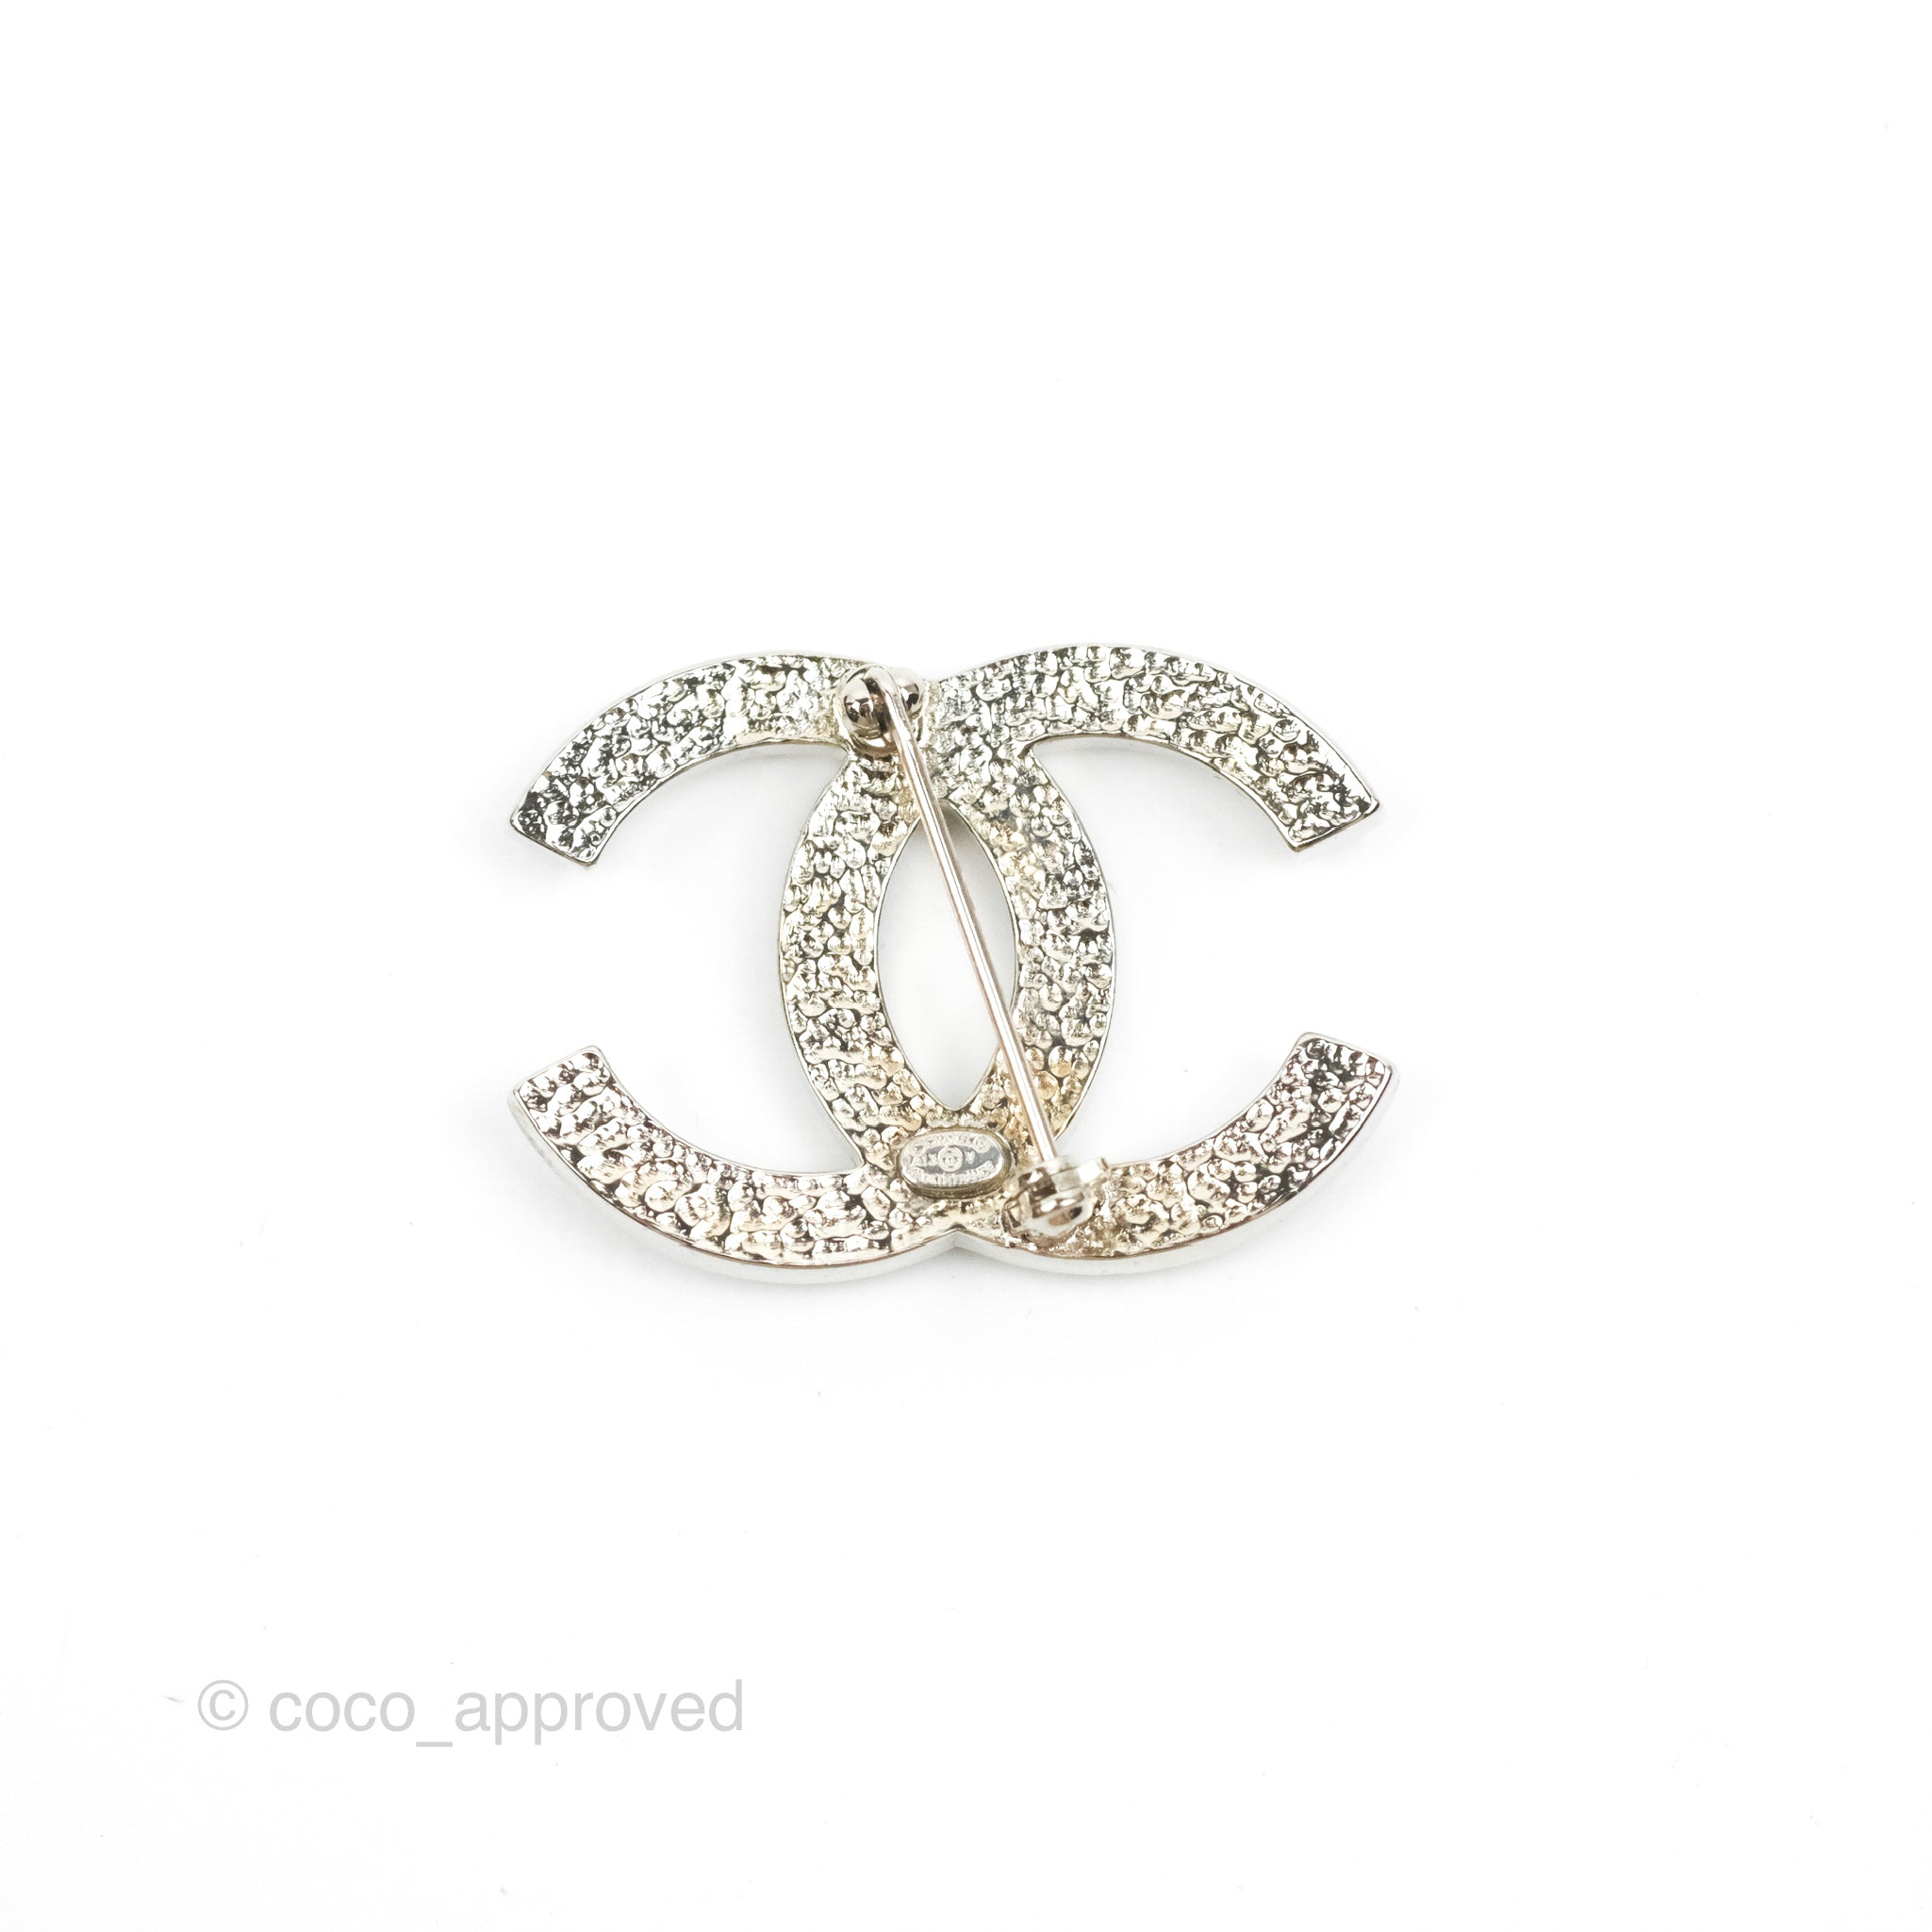 CHANEL, Jewelry, Authentic Chanel Cc Crystal Baguette Silver Brooch A  Classic Timeless Piece